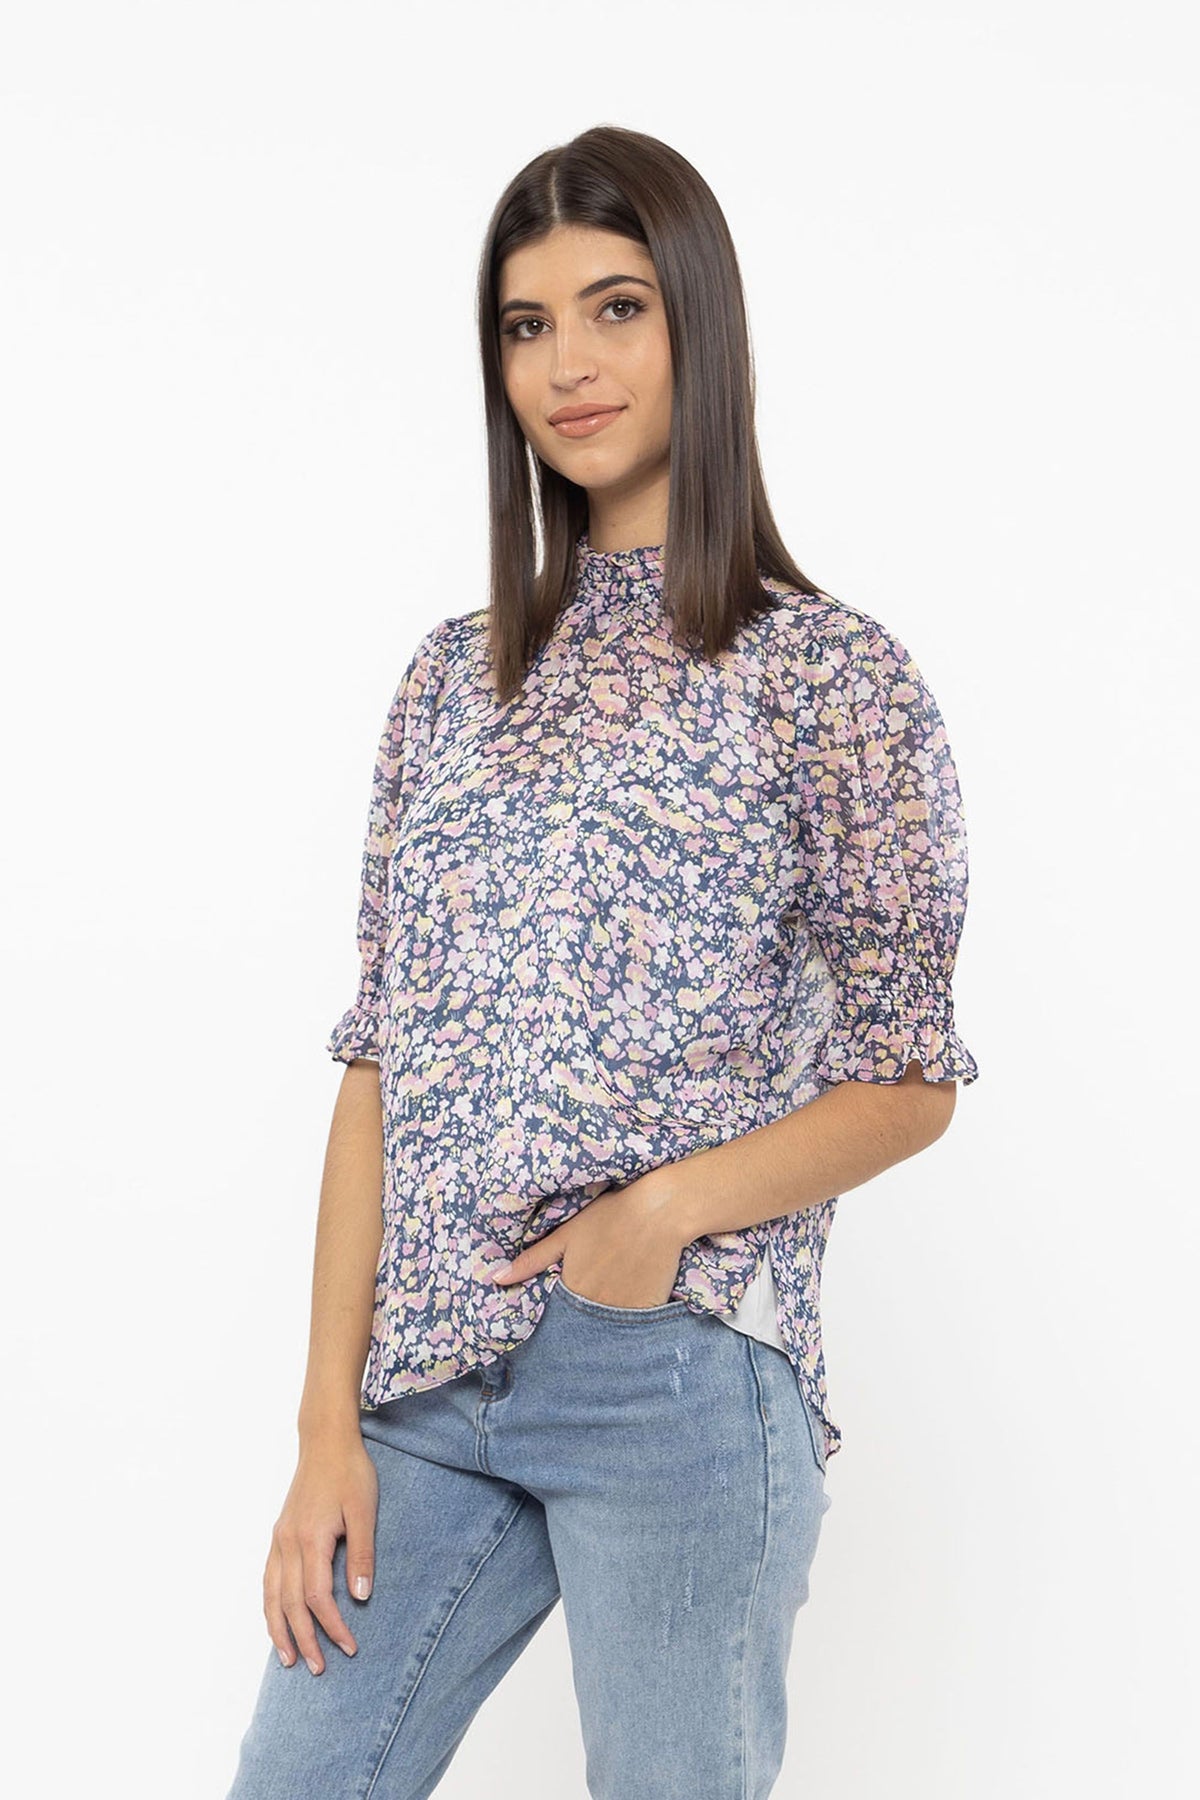 Notting Hill Top Short Sleeve Pink Surprise